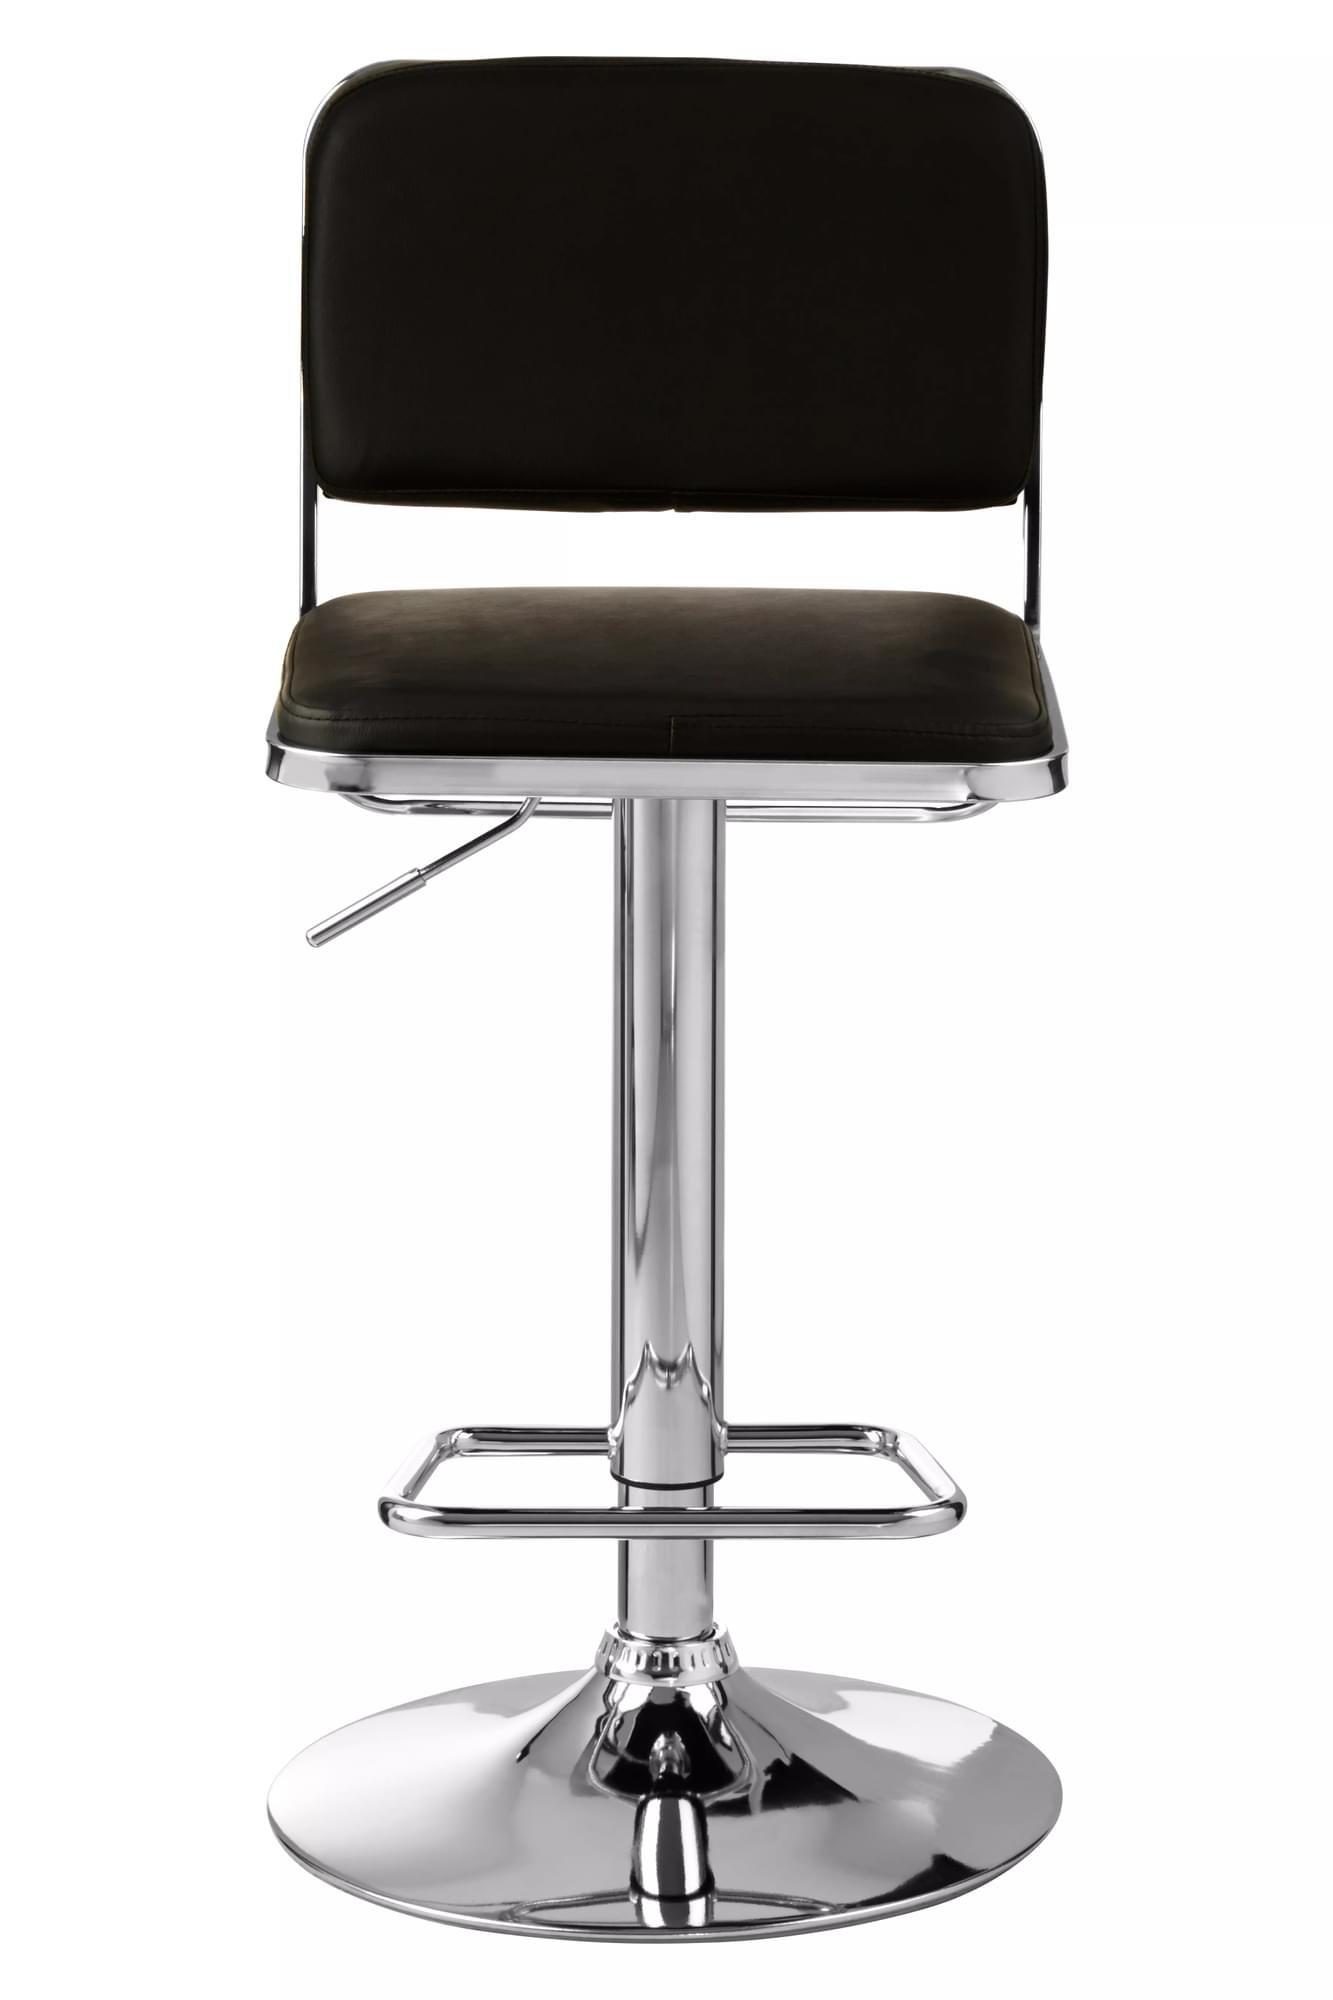 Interiors by Premier Light Grey Seat and Chrome Base Bar Stool, Adjustable Height Kitchen Bar Stool,